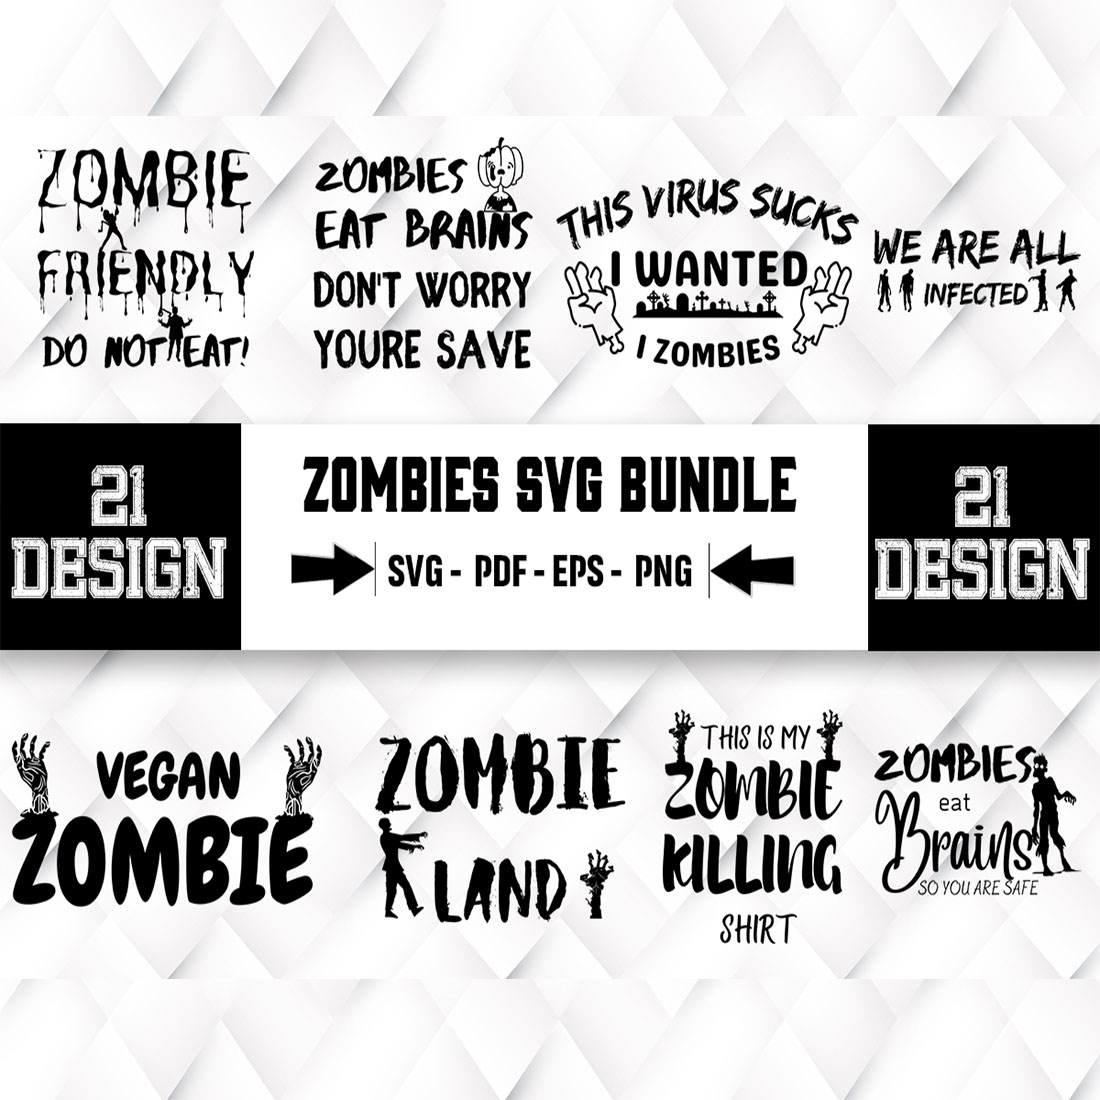 Pack of unique images for prints on the theme of zombies